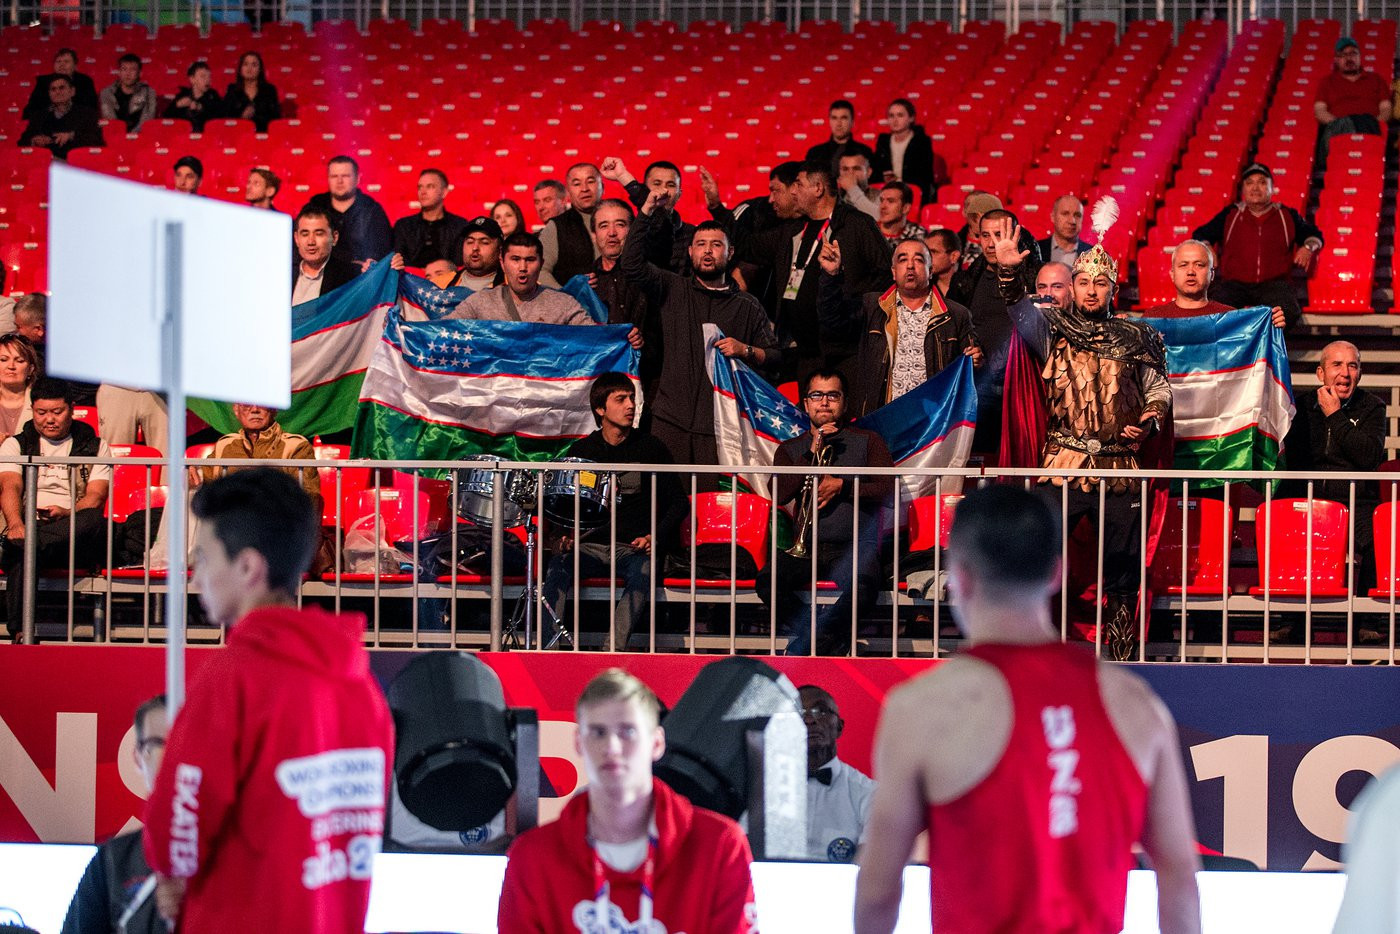 The unanimous result delighted the Uzbekistan support in the venue ©Yekaterinburg 2019